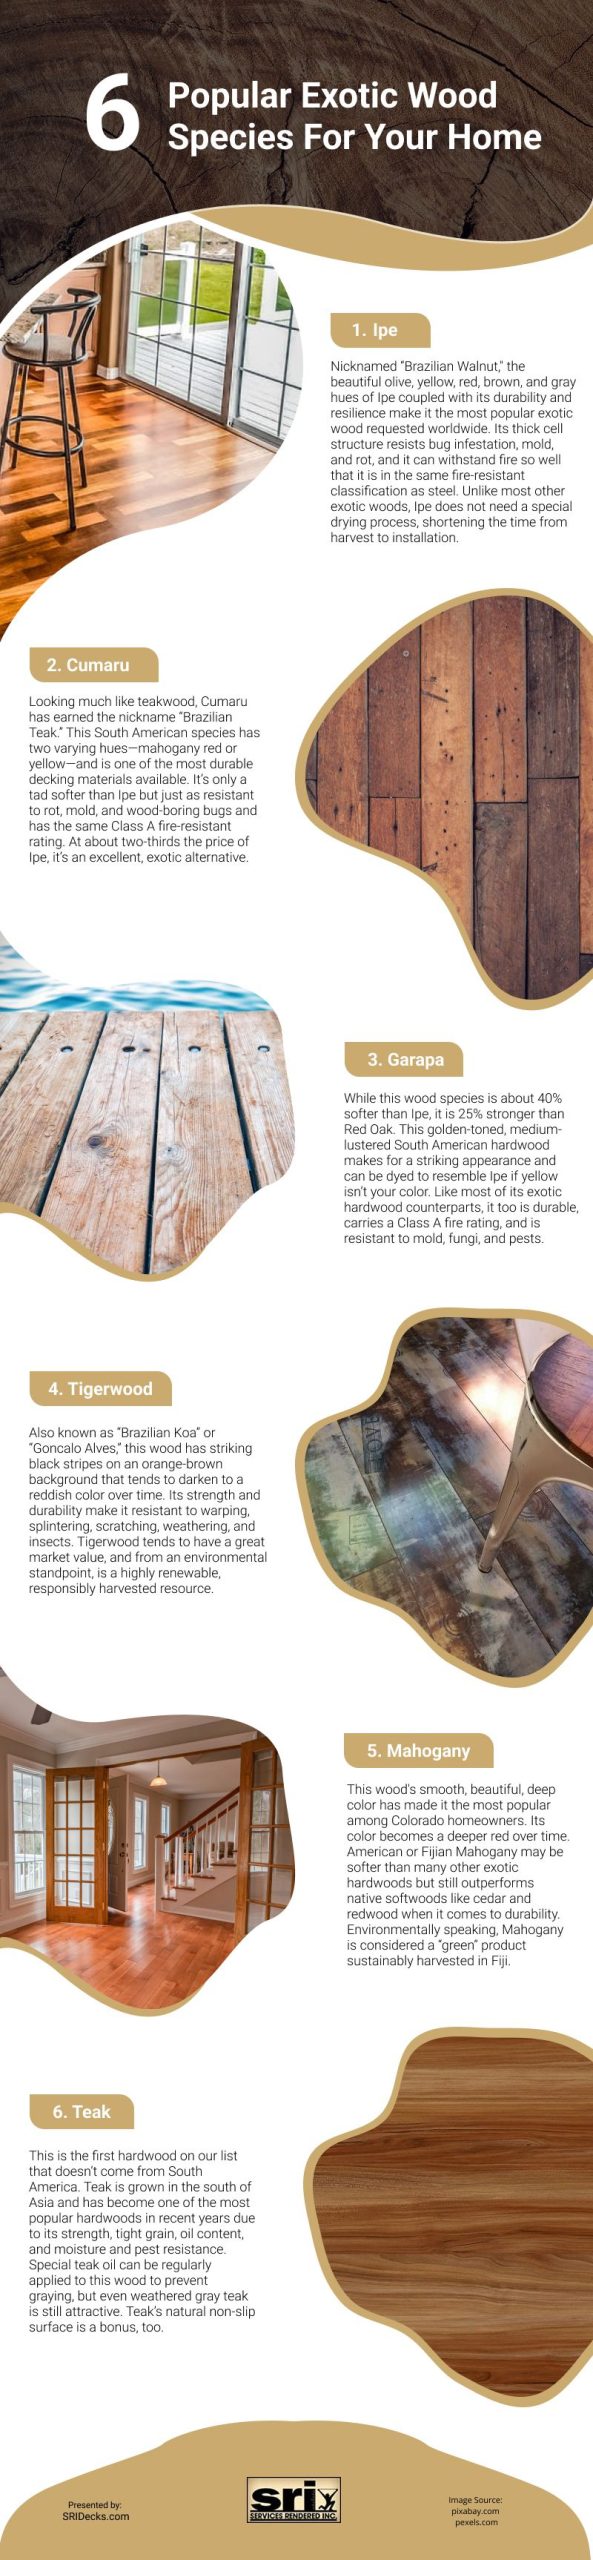 6 Popular Exotic Wood Species For Your Home Infographic